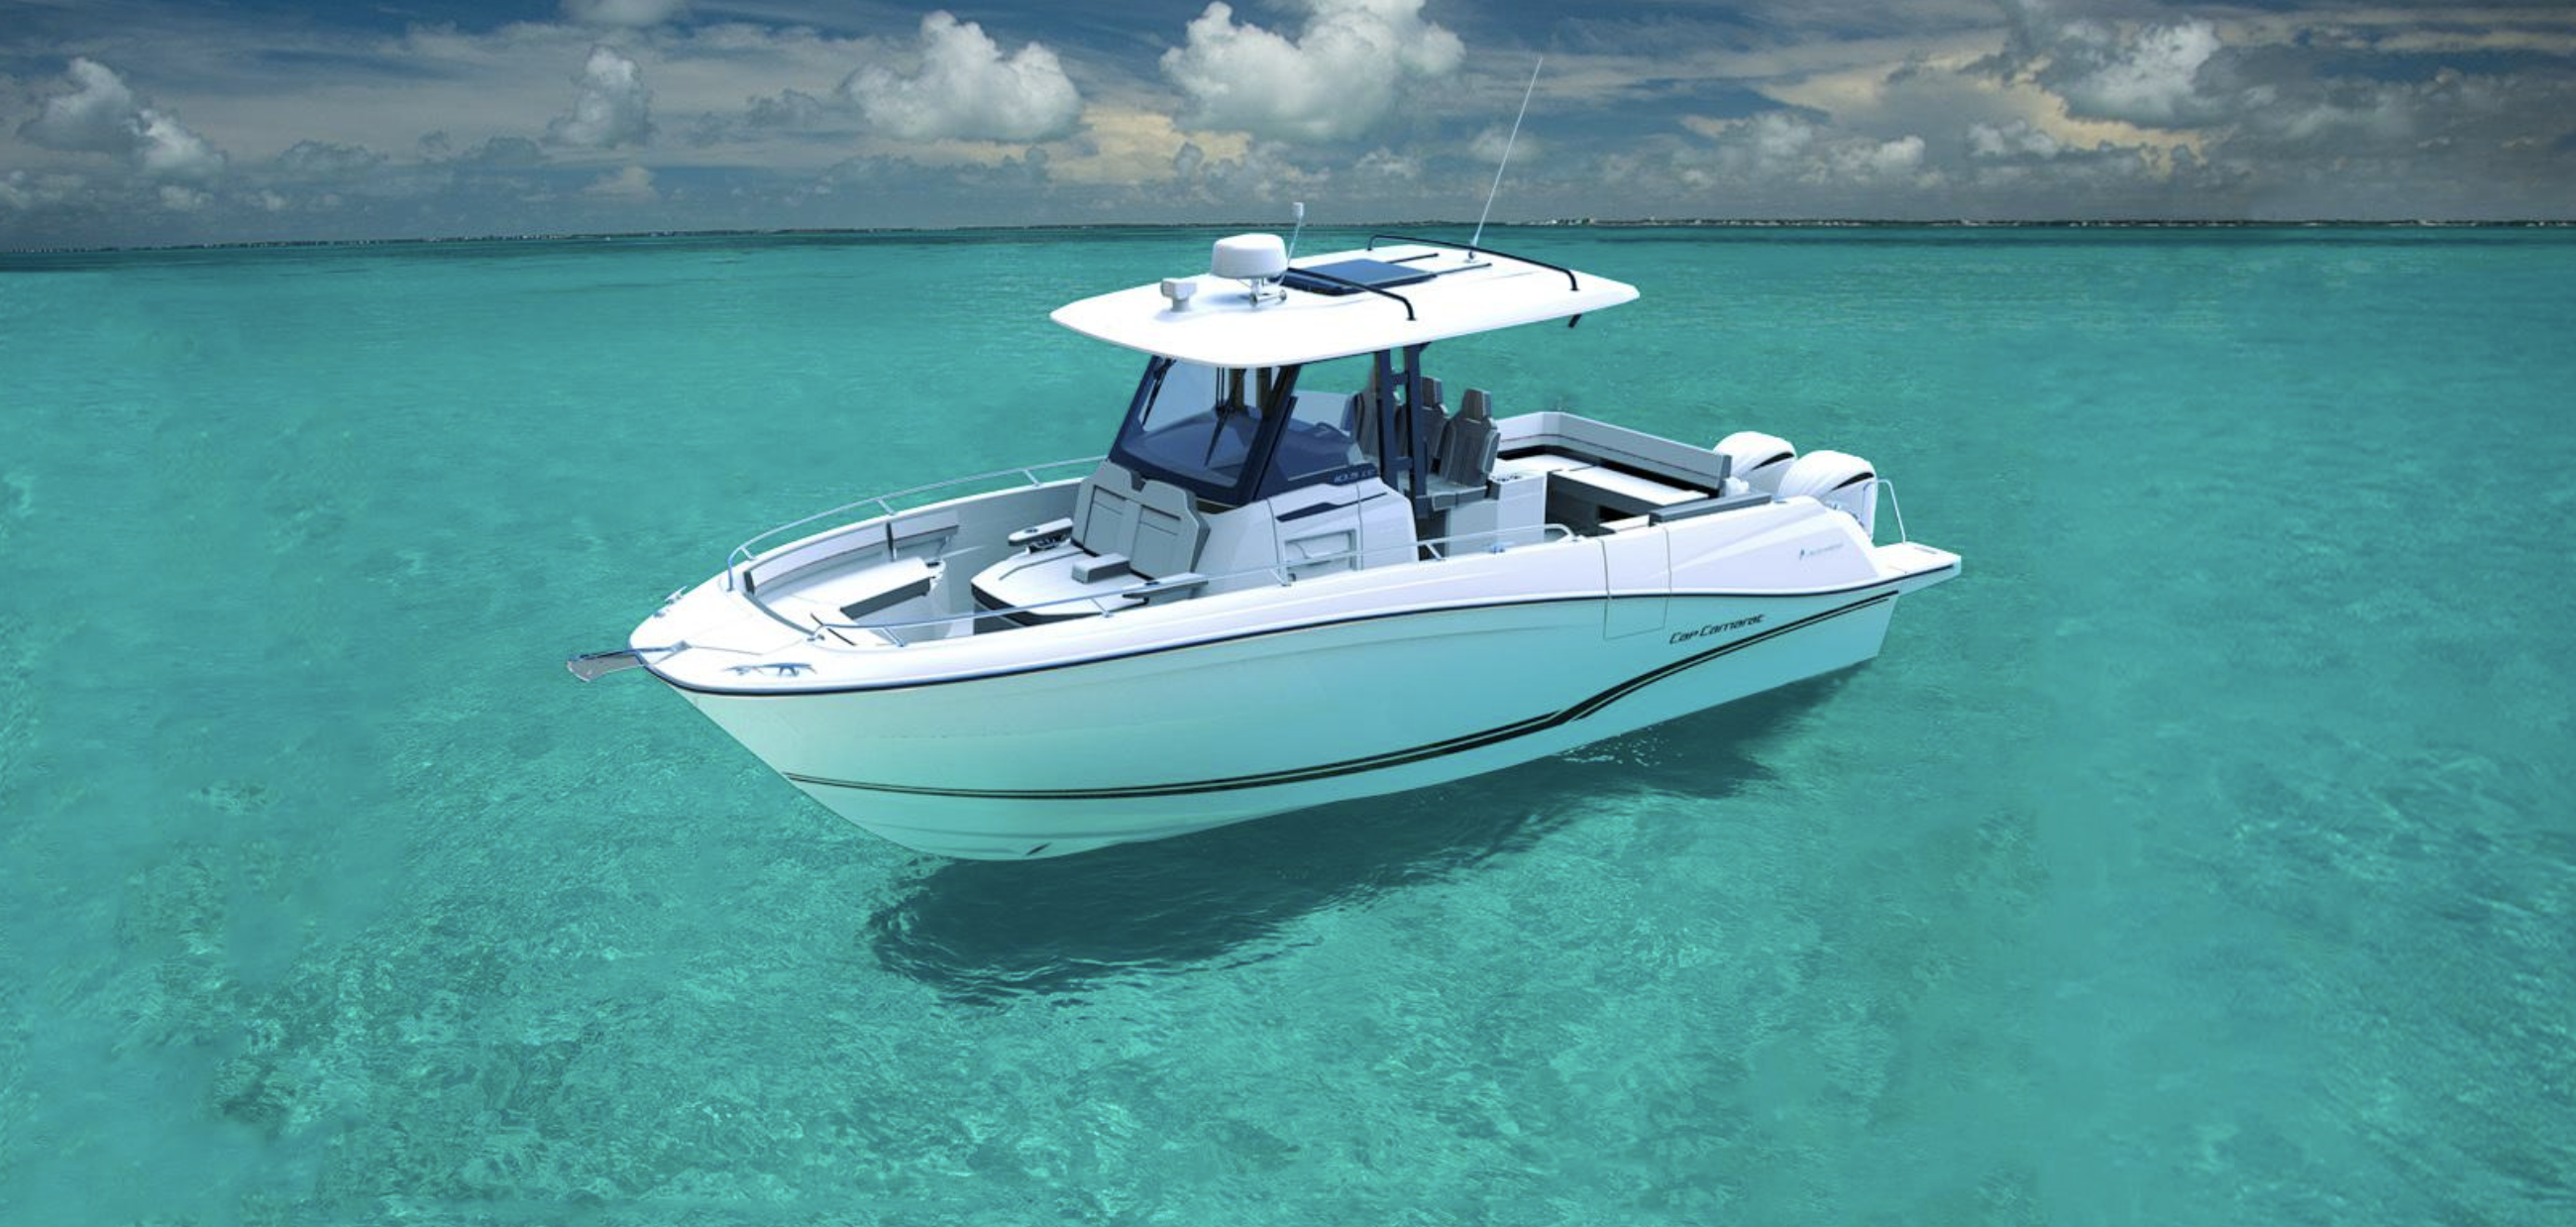 The new Cap Camarat 10.5cc floating on turquoise water with blue sky and clouds in the background. The boat is sporty looking with two outboard engine, a under cover centre console with glass windsceen. The boat is mainly white.